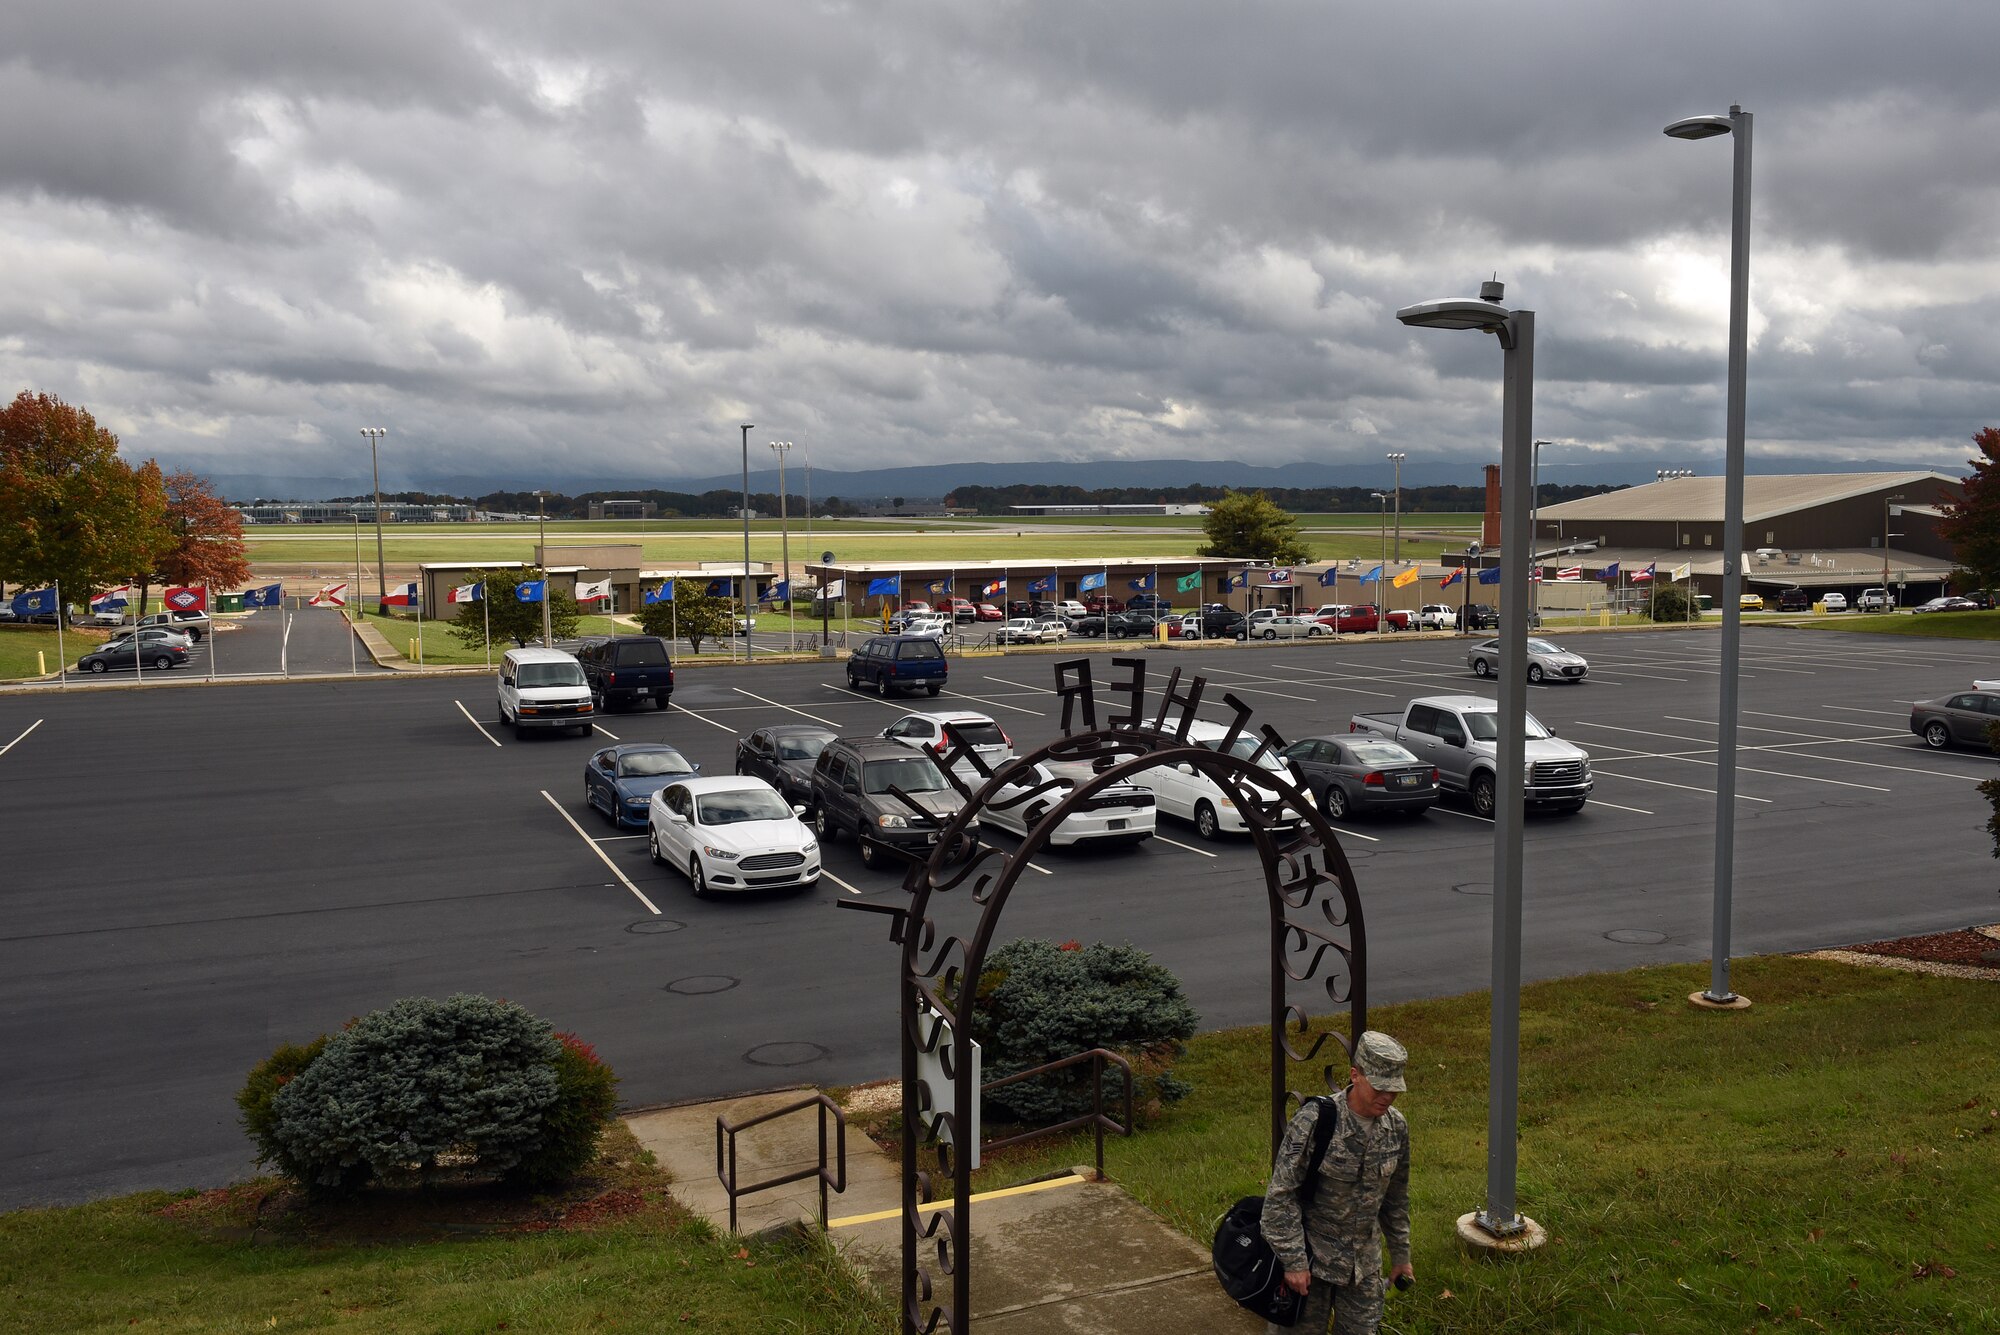 MCGHEE TYSON AIR NATIONAL GUARD BASE, Tenn. - The I.G. Brown Training and Education Center uses LED lighting and automatic lighting for its walkways and parking lot here Oct. 28, 2015, to manage its energy use. (U.S. Air National Guard photo by Master Sgt. Mike R. Smith/Released)